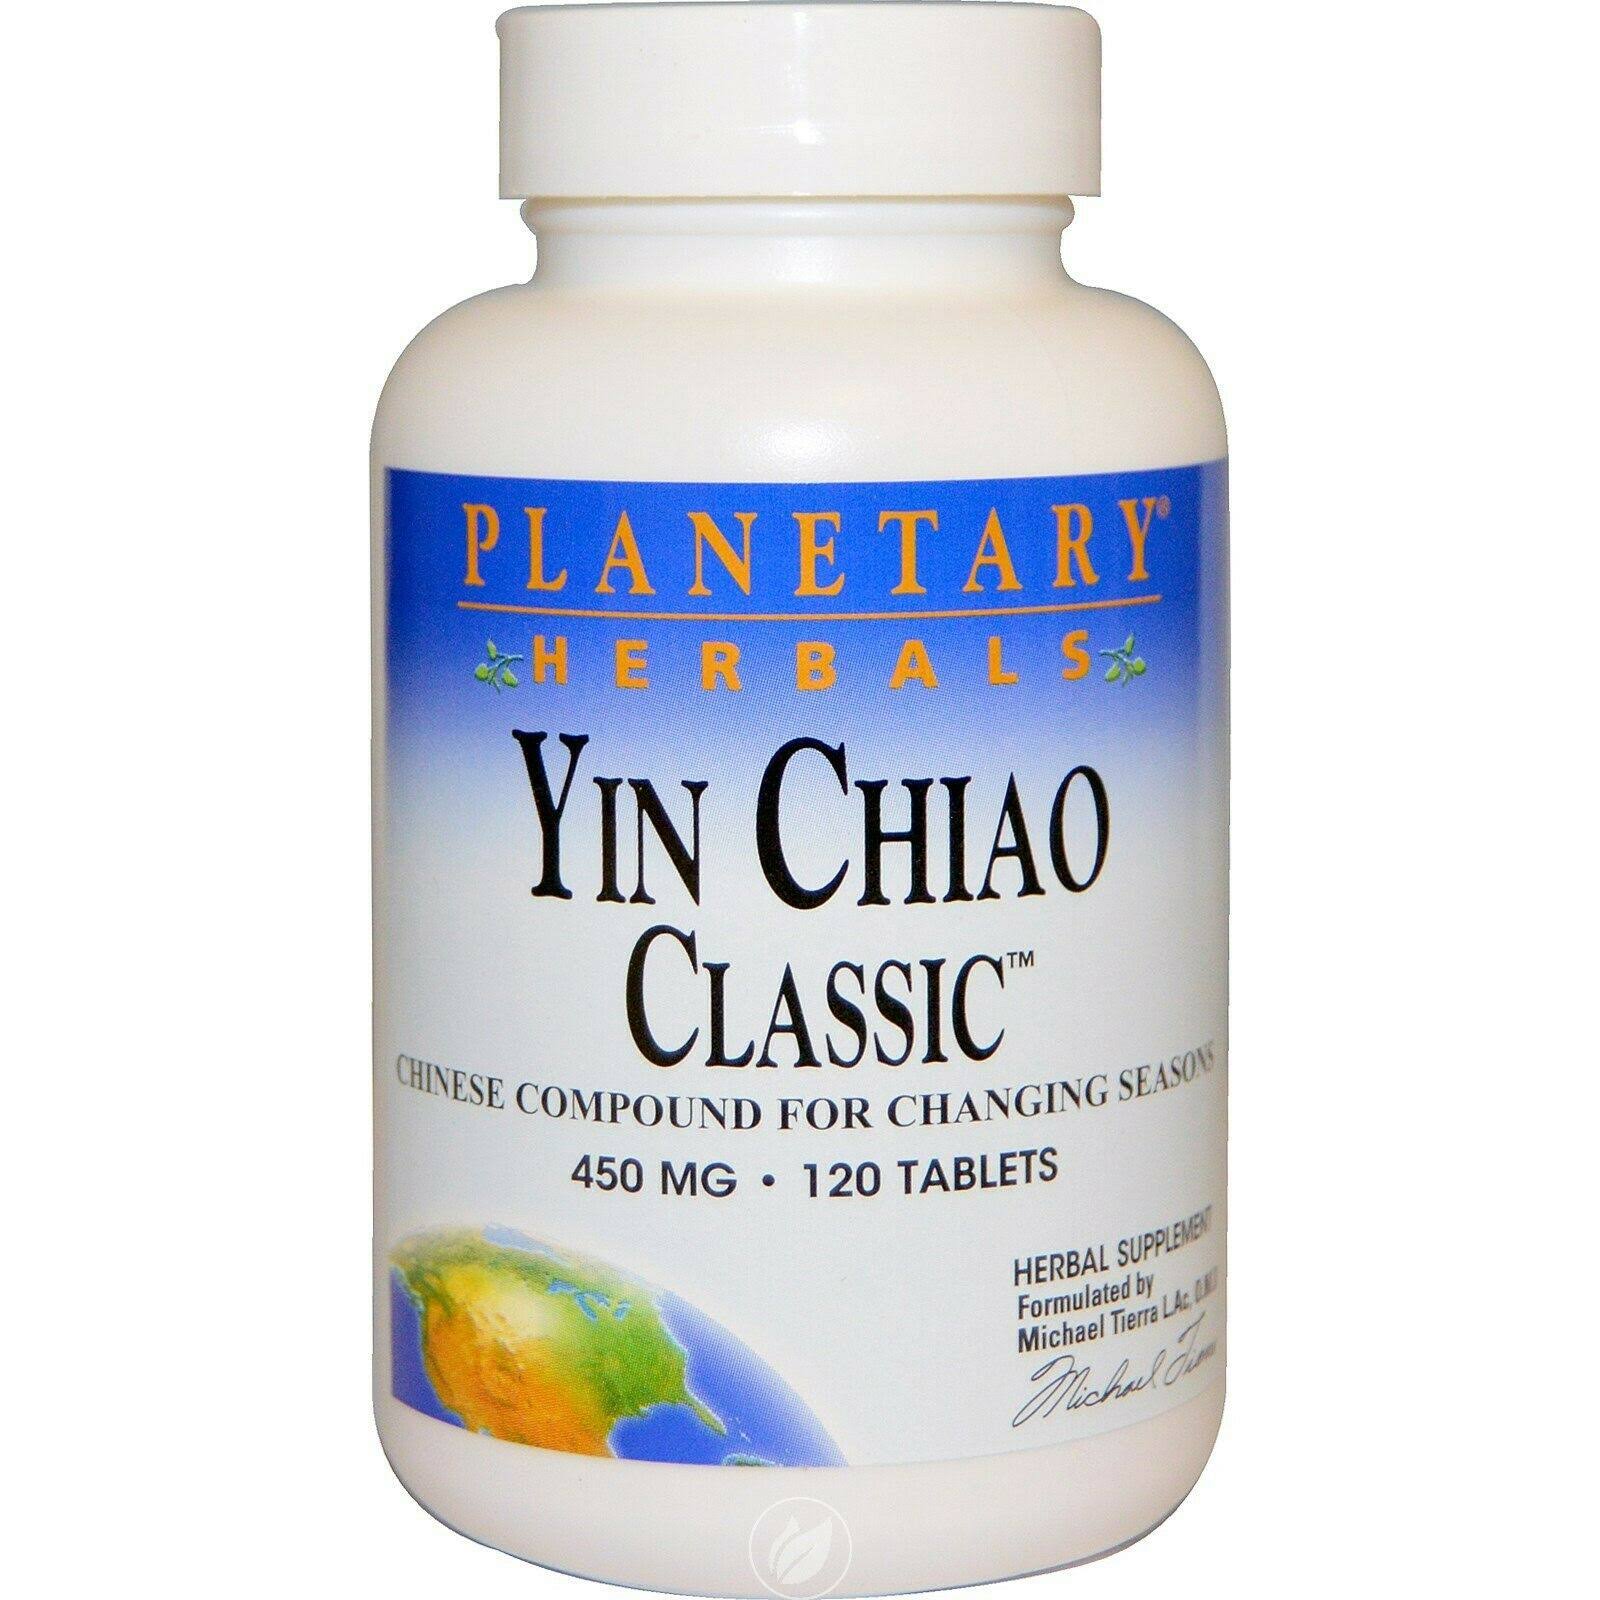 Planetary Herbals Yin Chiao Classic Supplement - 450mg, 120 Tablets